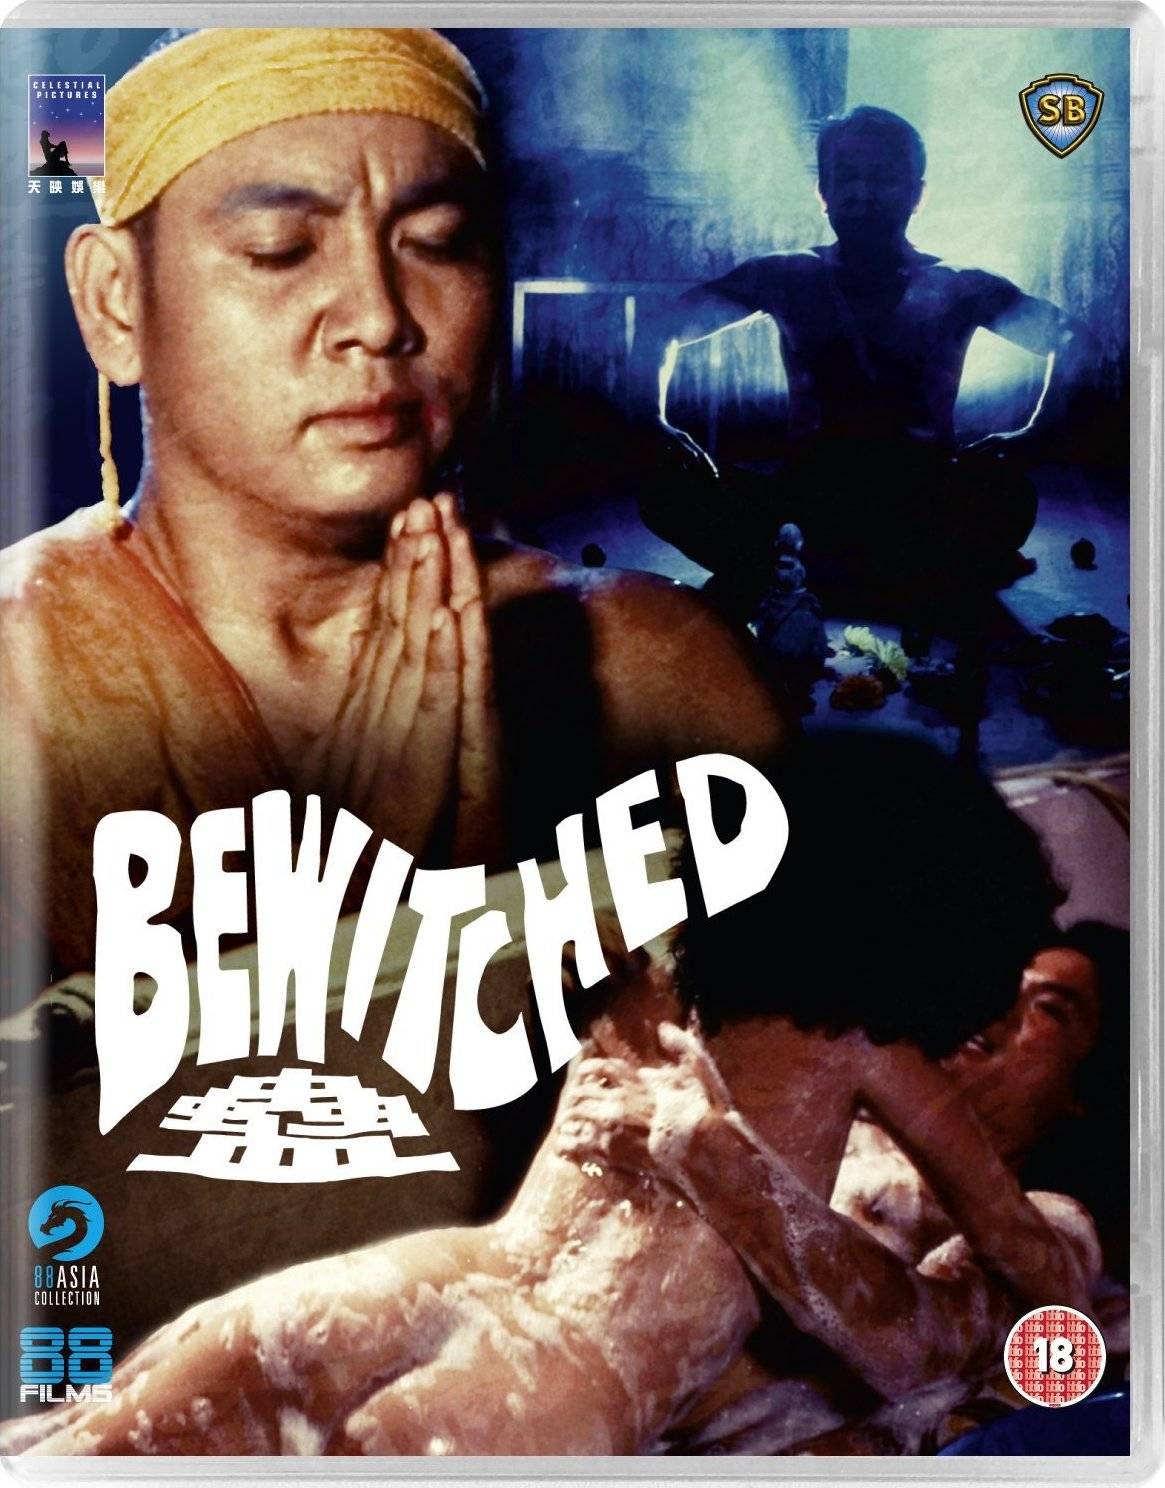 Bewitched (1981)